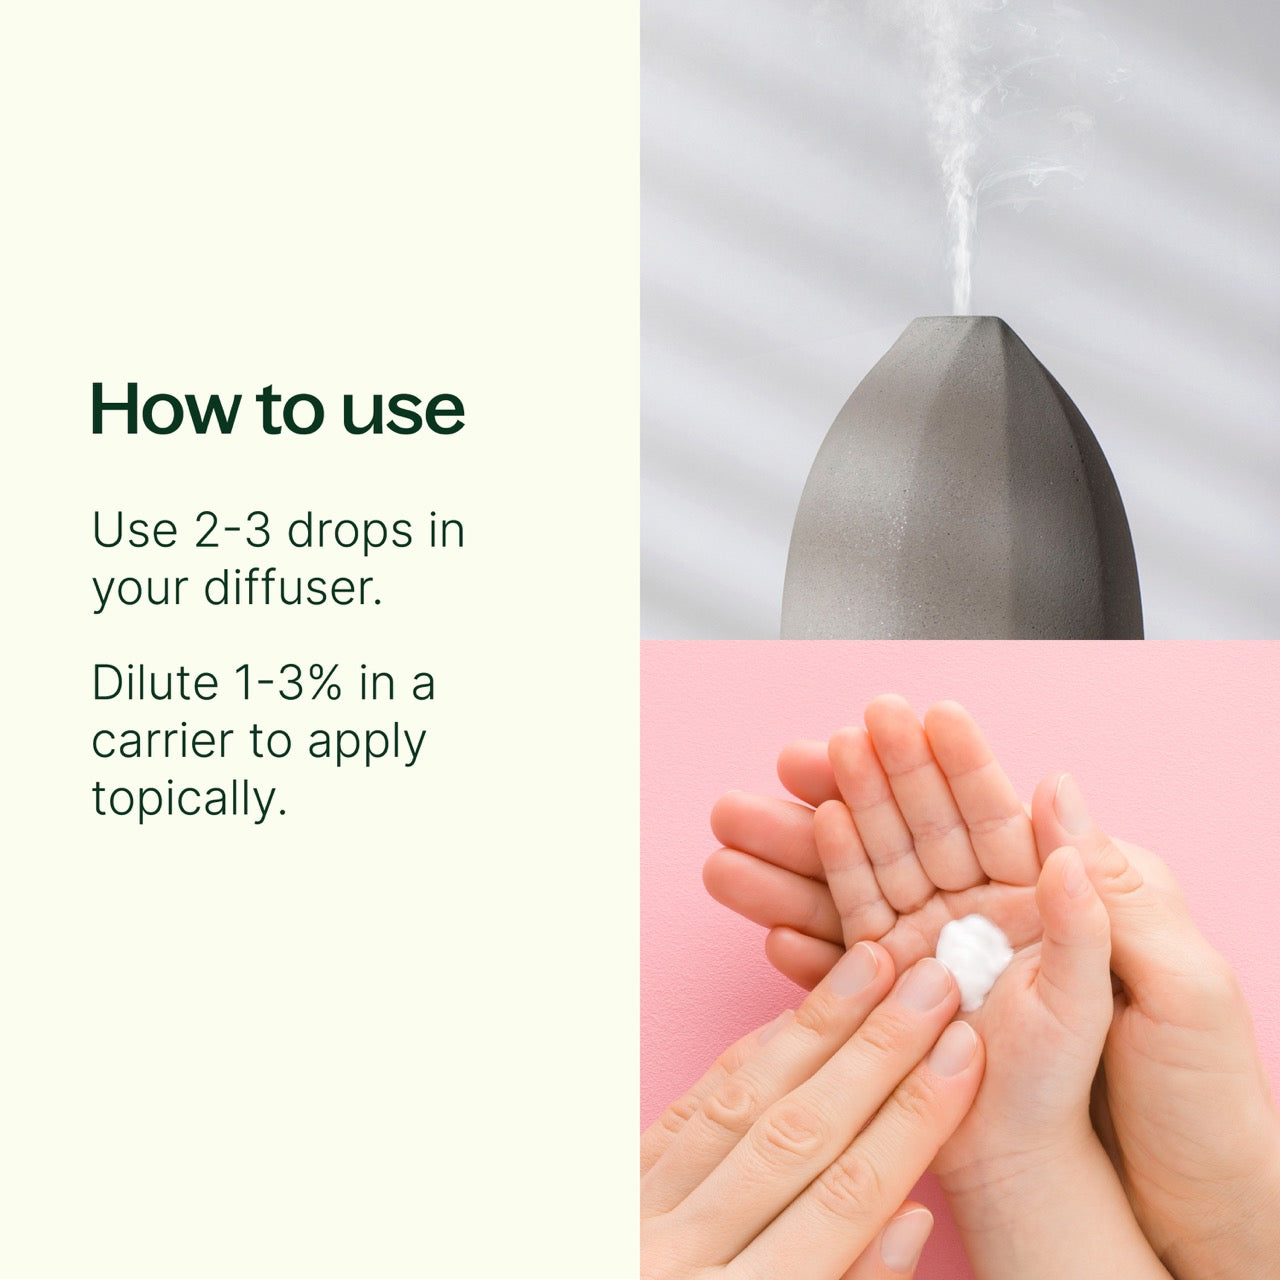 How to use Calming the Child KidSafe Essential Oil: Use 2-3 drops in your diffuser or dilute to 1-3% in a carrier to apply topically